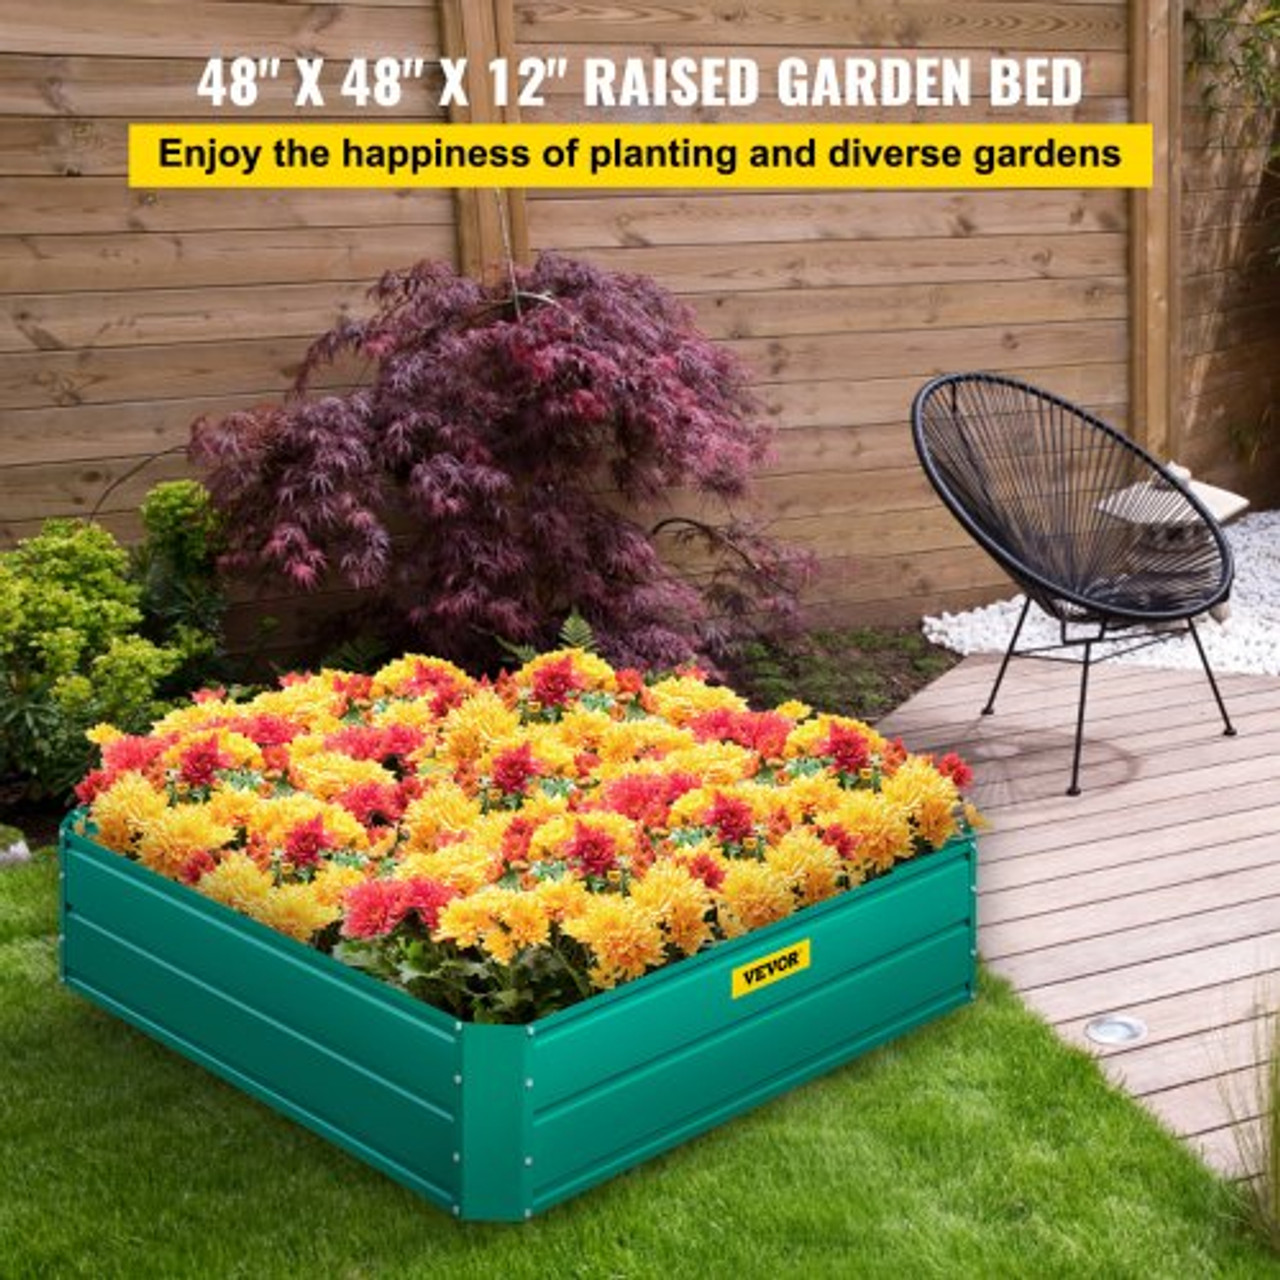 Galvanized Raised Garden Bed, 48" x 48" x 12" Metal Planter Box, Green Steel Plant Raised Garden Bed Kit, Planter Boxes Outdoor for Growing Vegetables,Flowers,Fruits,Herbs,and Succulents